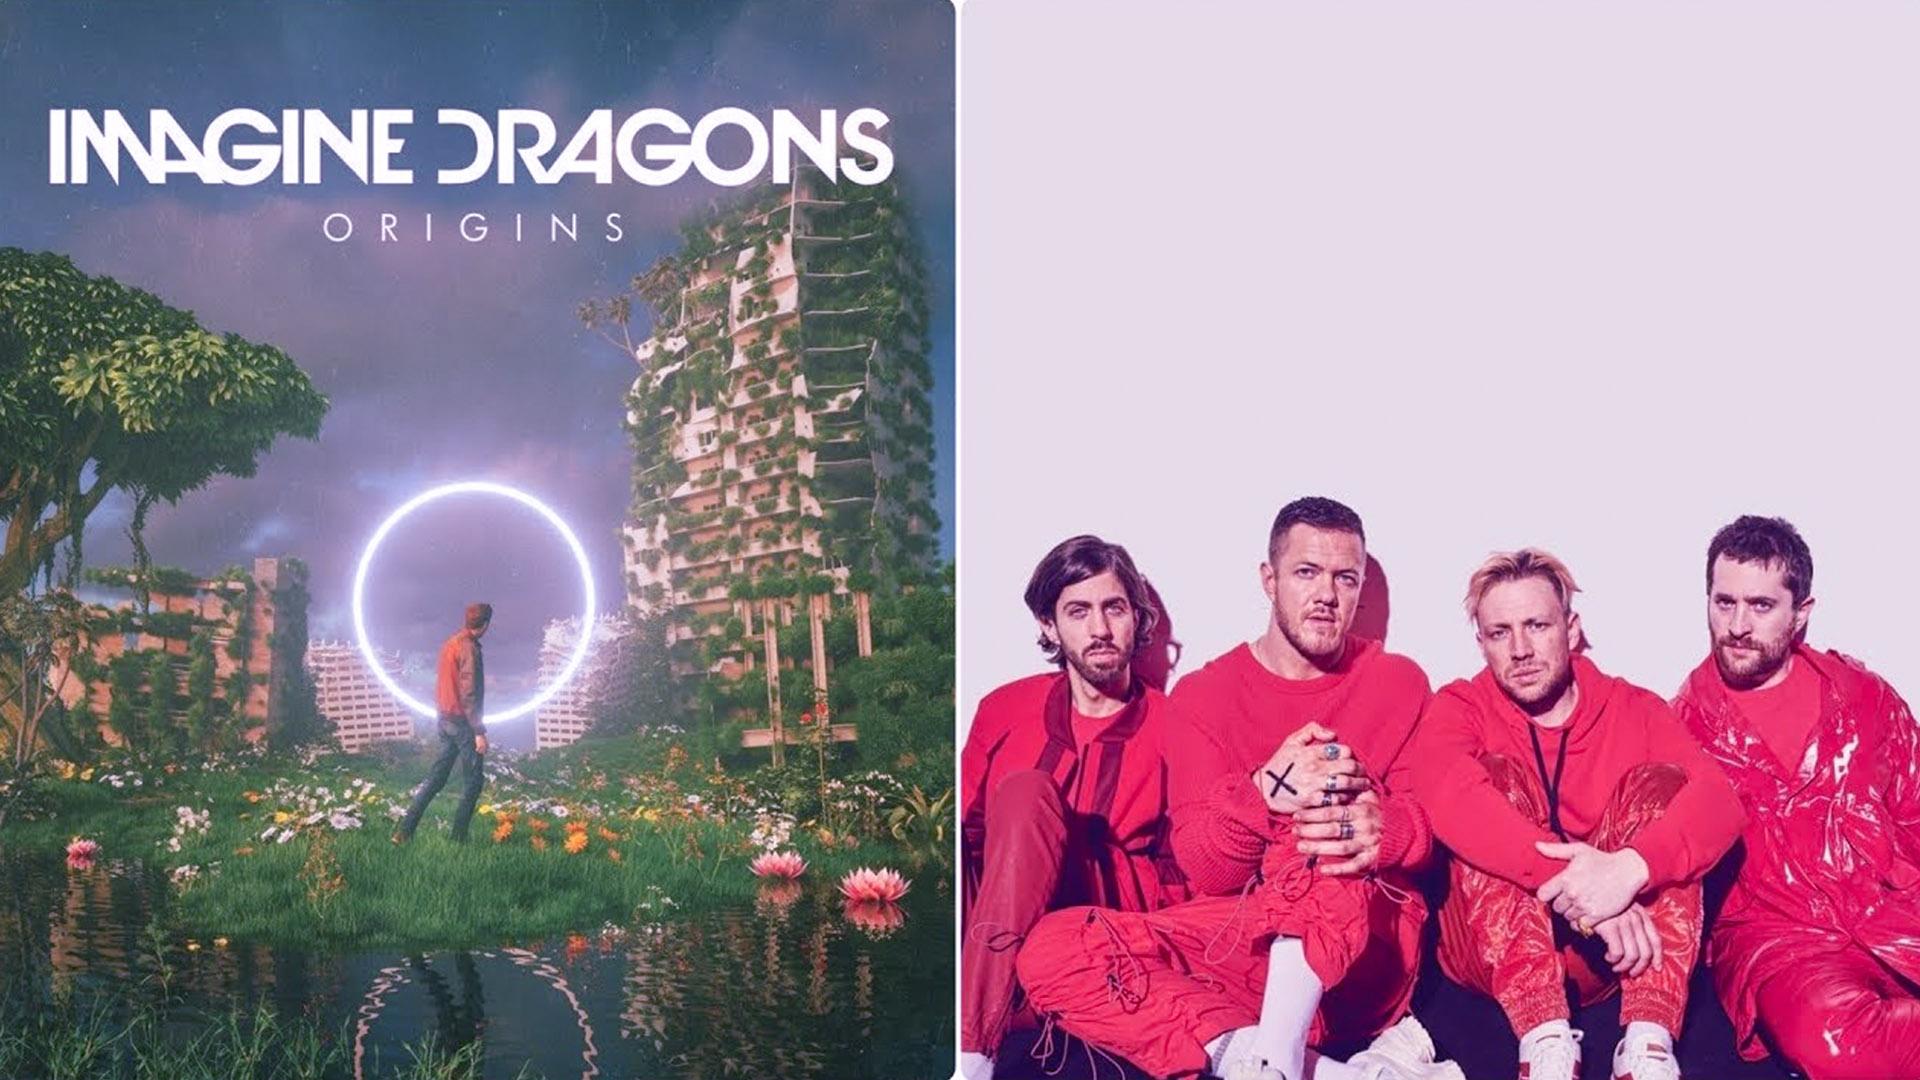 Imagine Dragons' Album Origins Is Out Now. Learn Where You Can